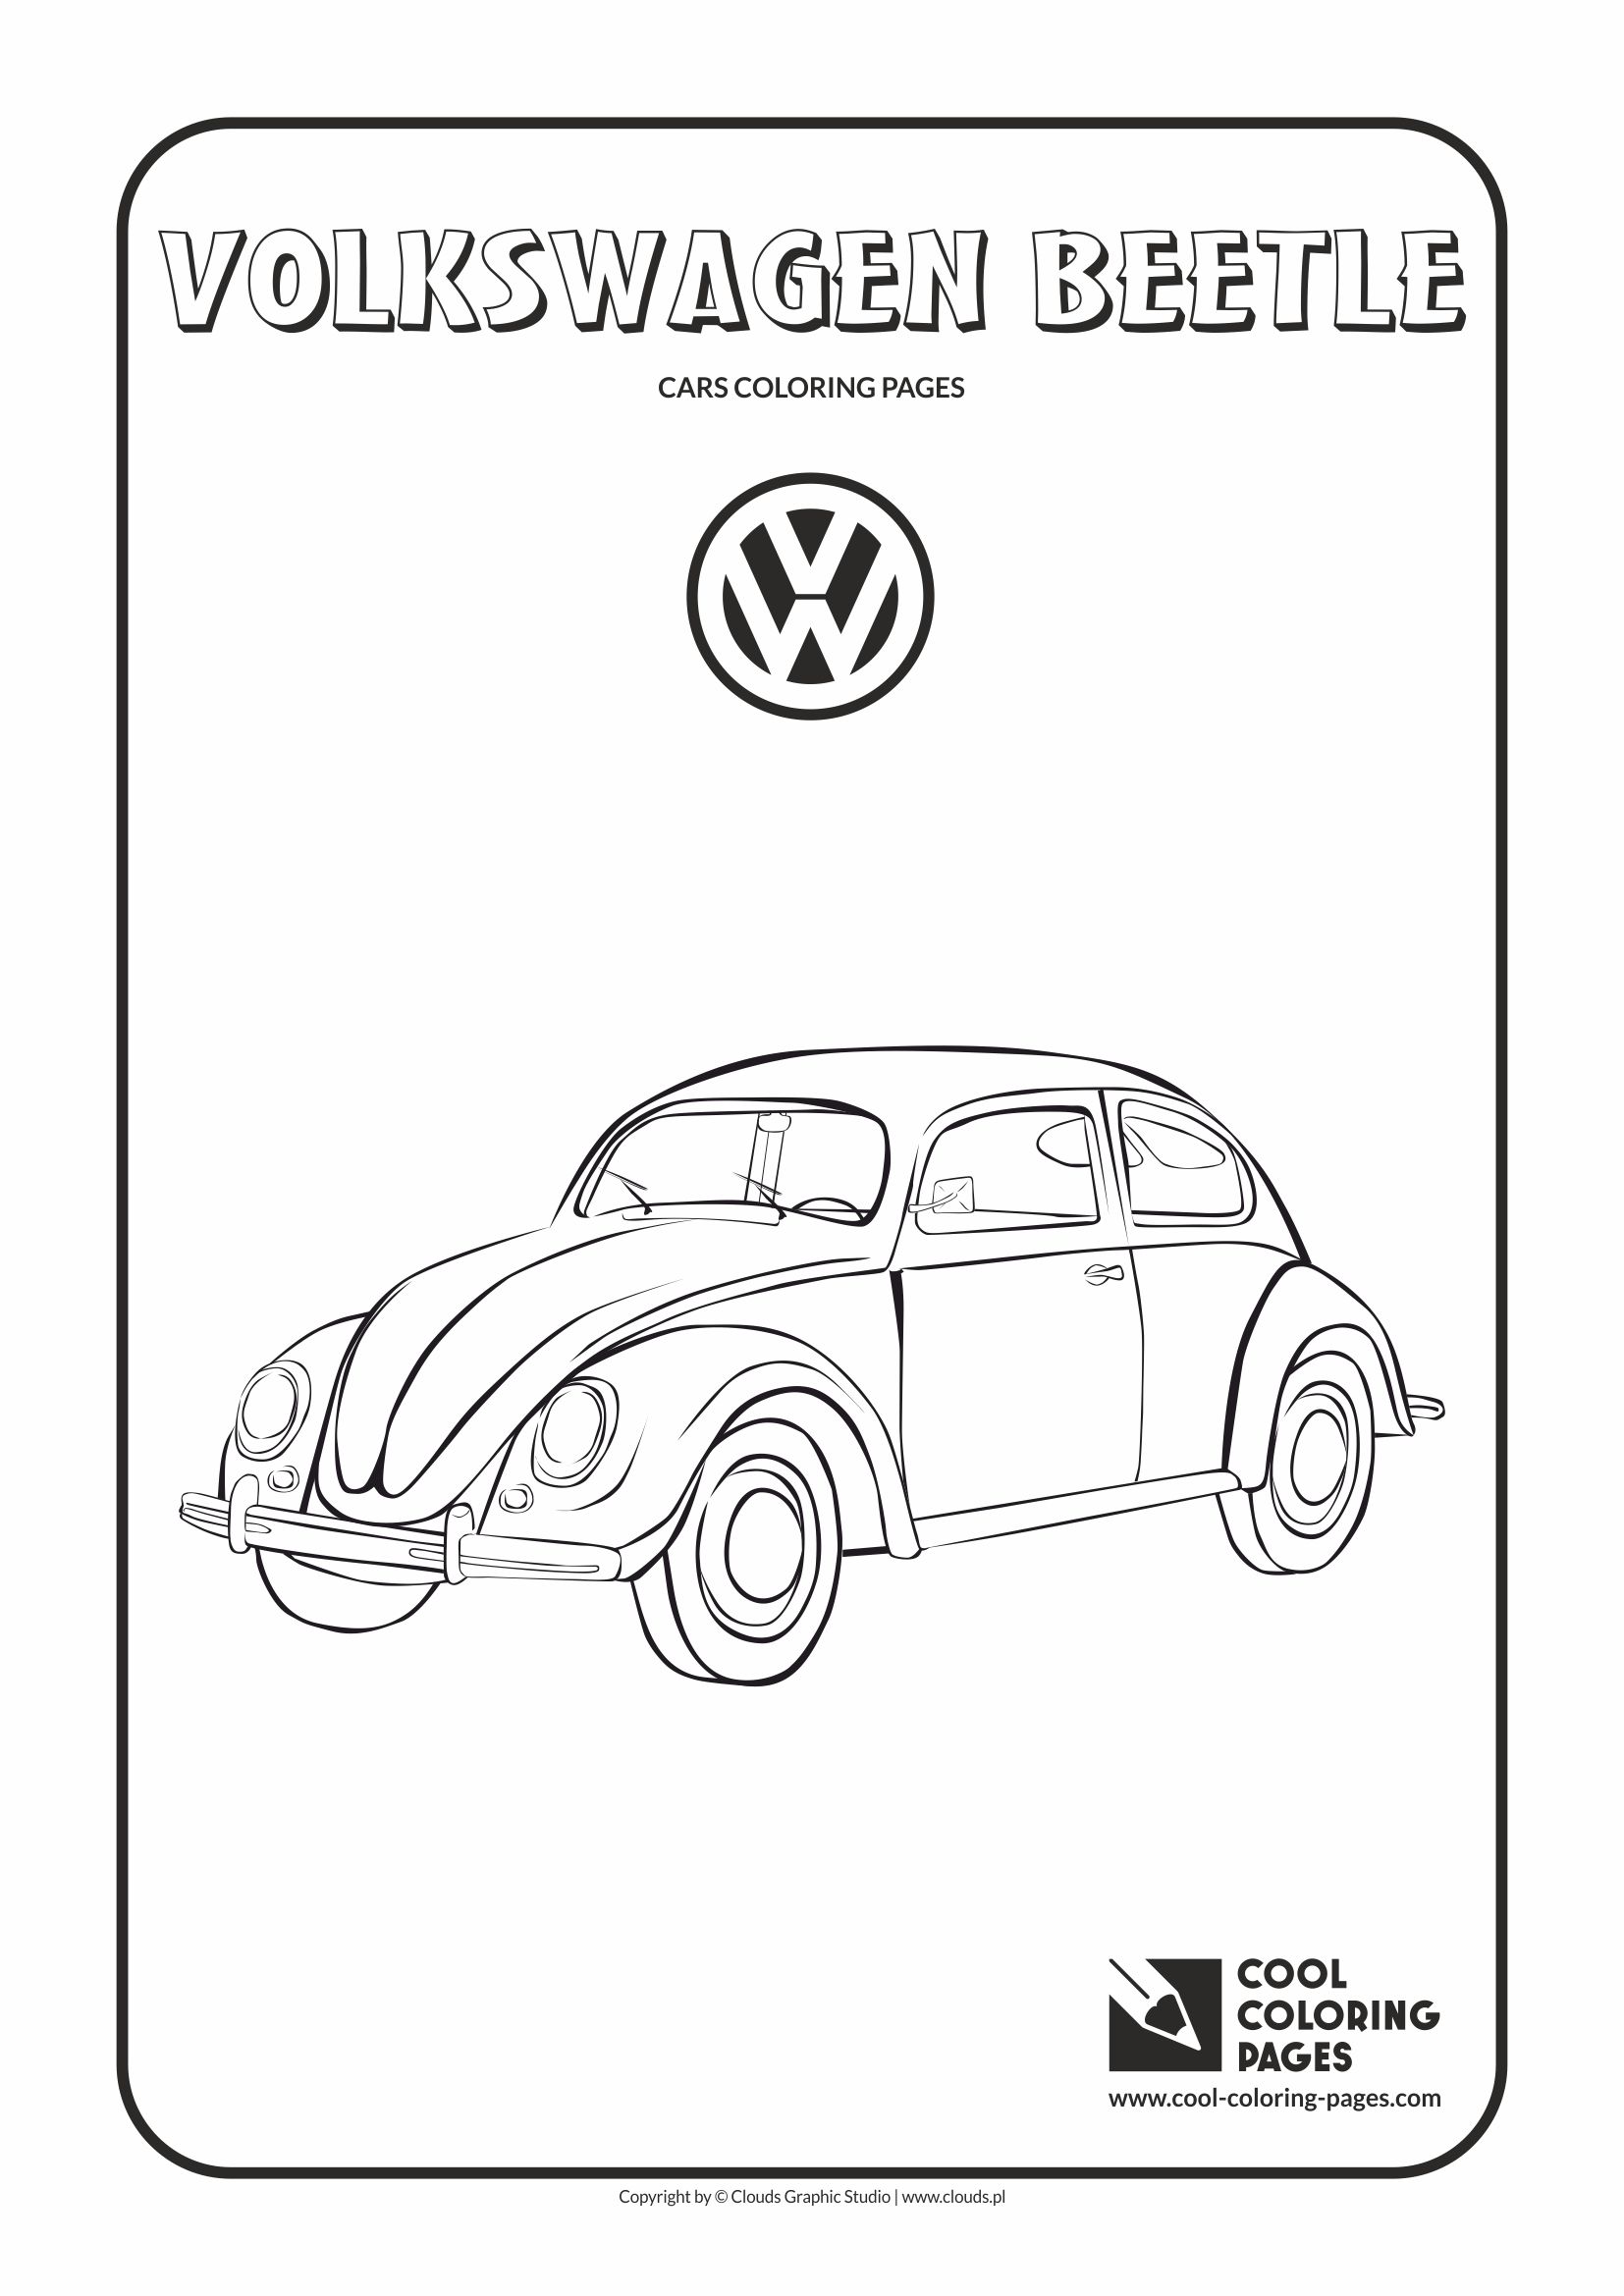 Cool Coloring Pages - Vehicles / Volkswagen Beetle / Coloring page with Volkswagen Beetle